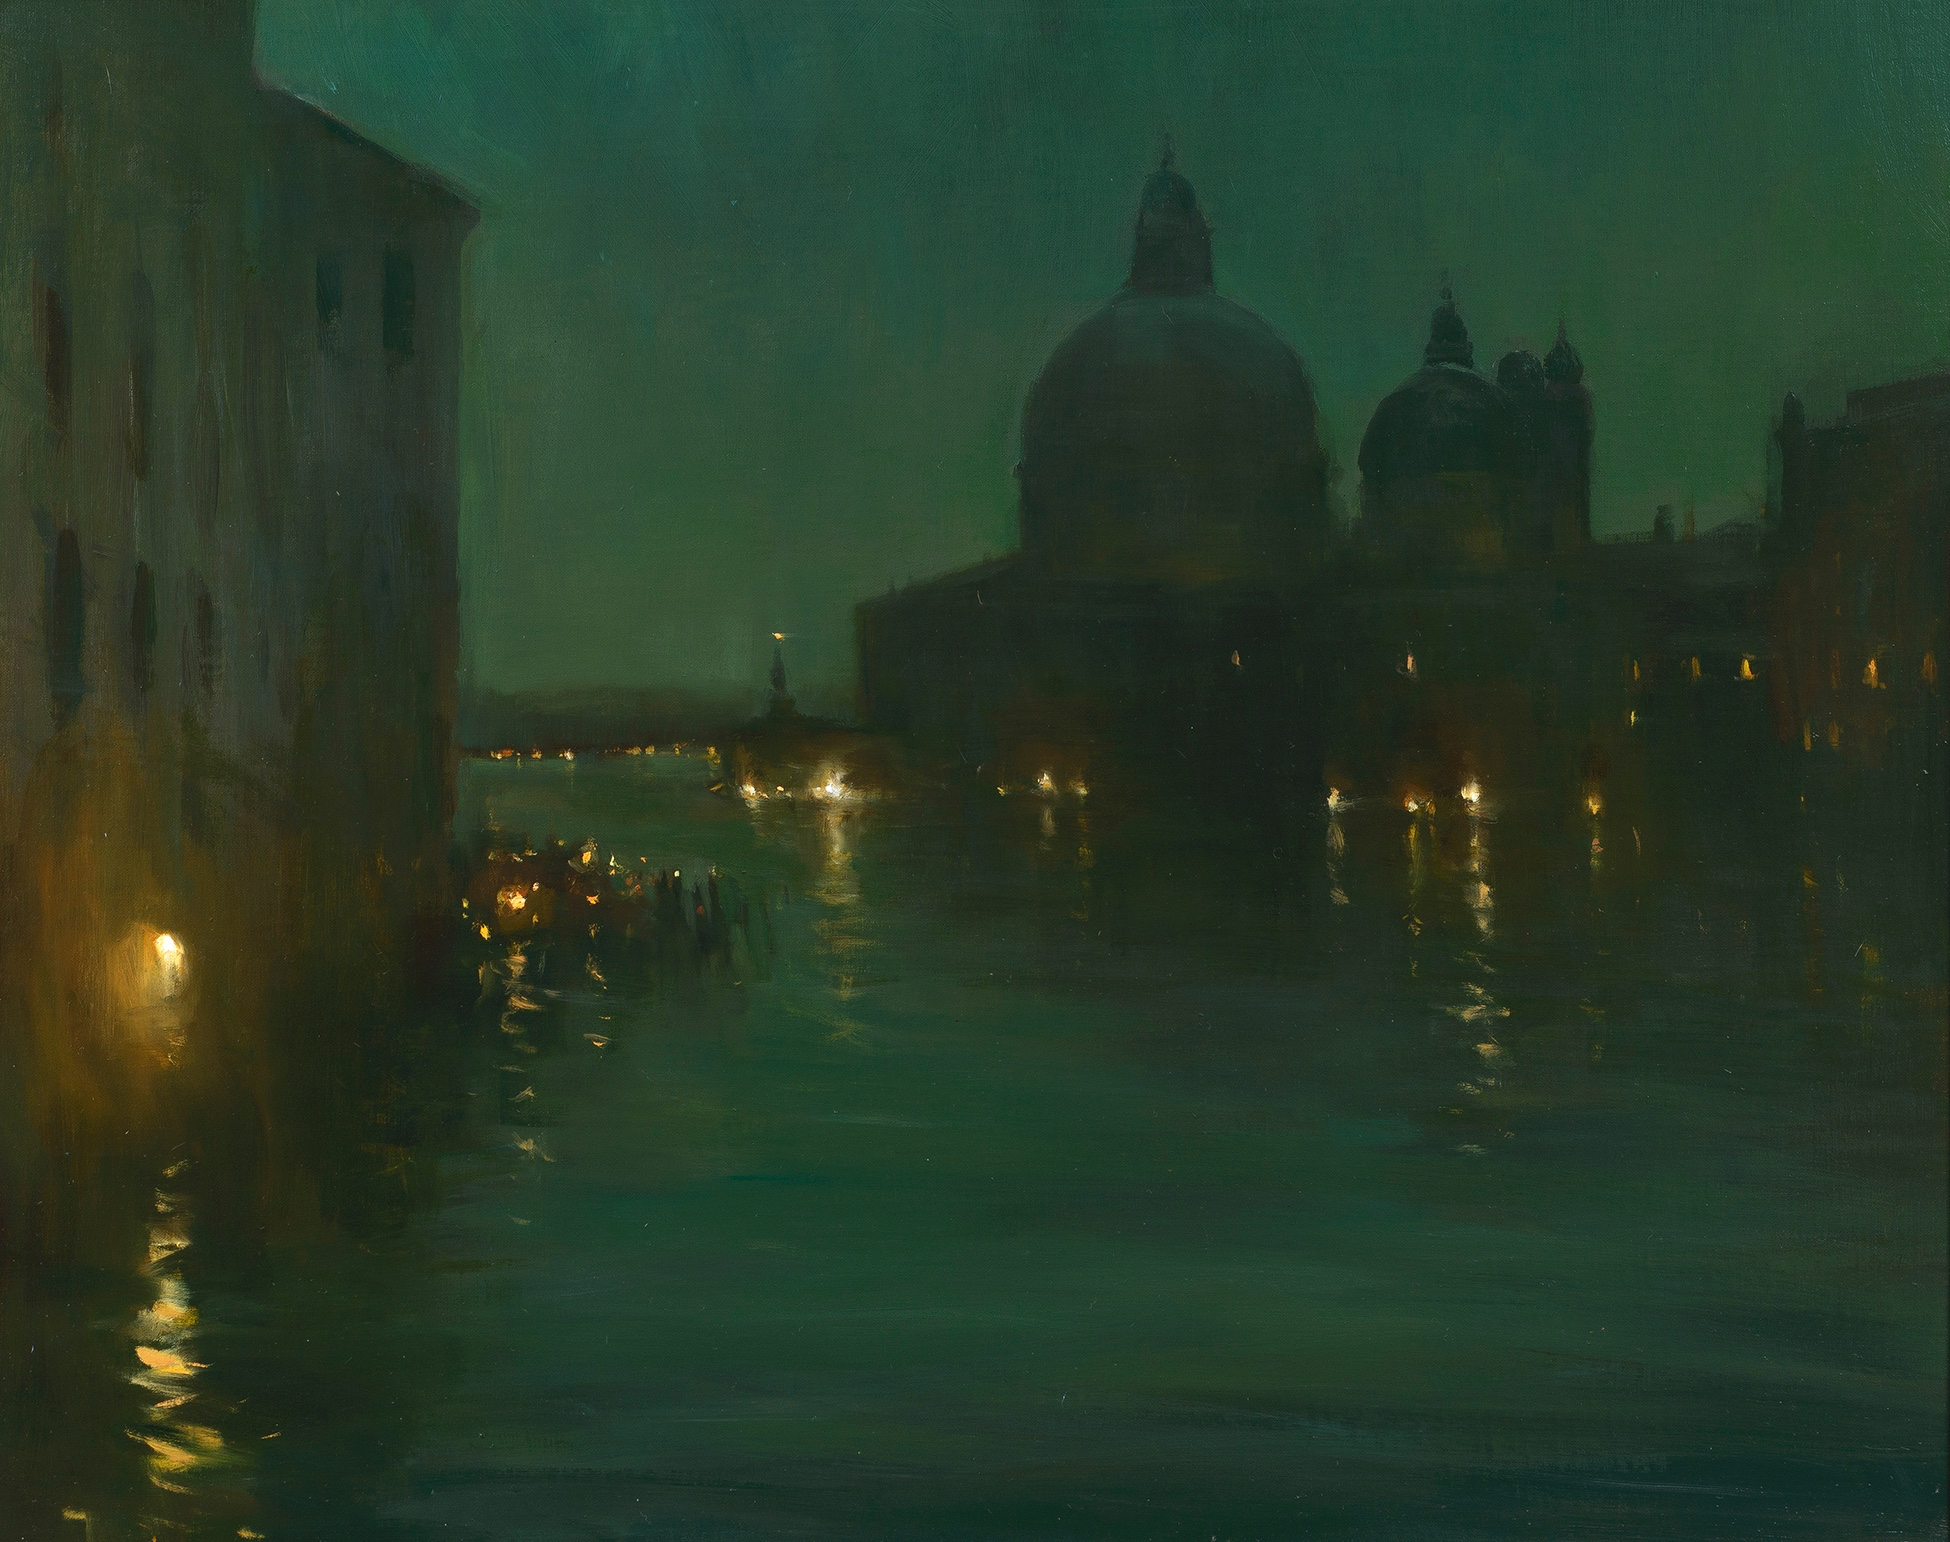  VENETIAN NOCTURNE&nbsp; &nbsp; &nbsp; &nbsp; &nbsp; &nbsp; 24X30 inches, oil on linen  